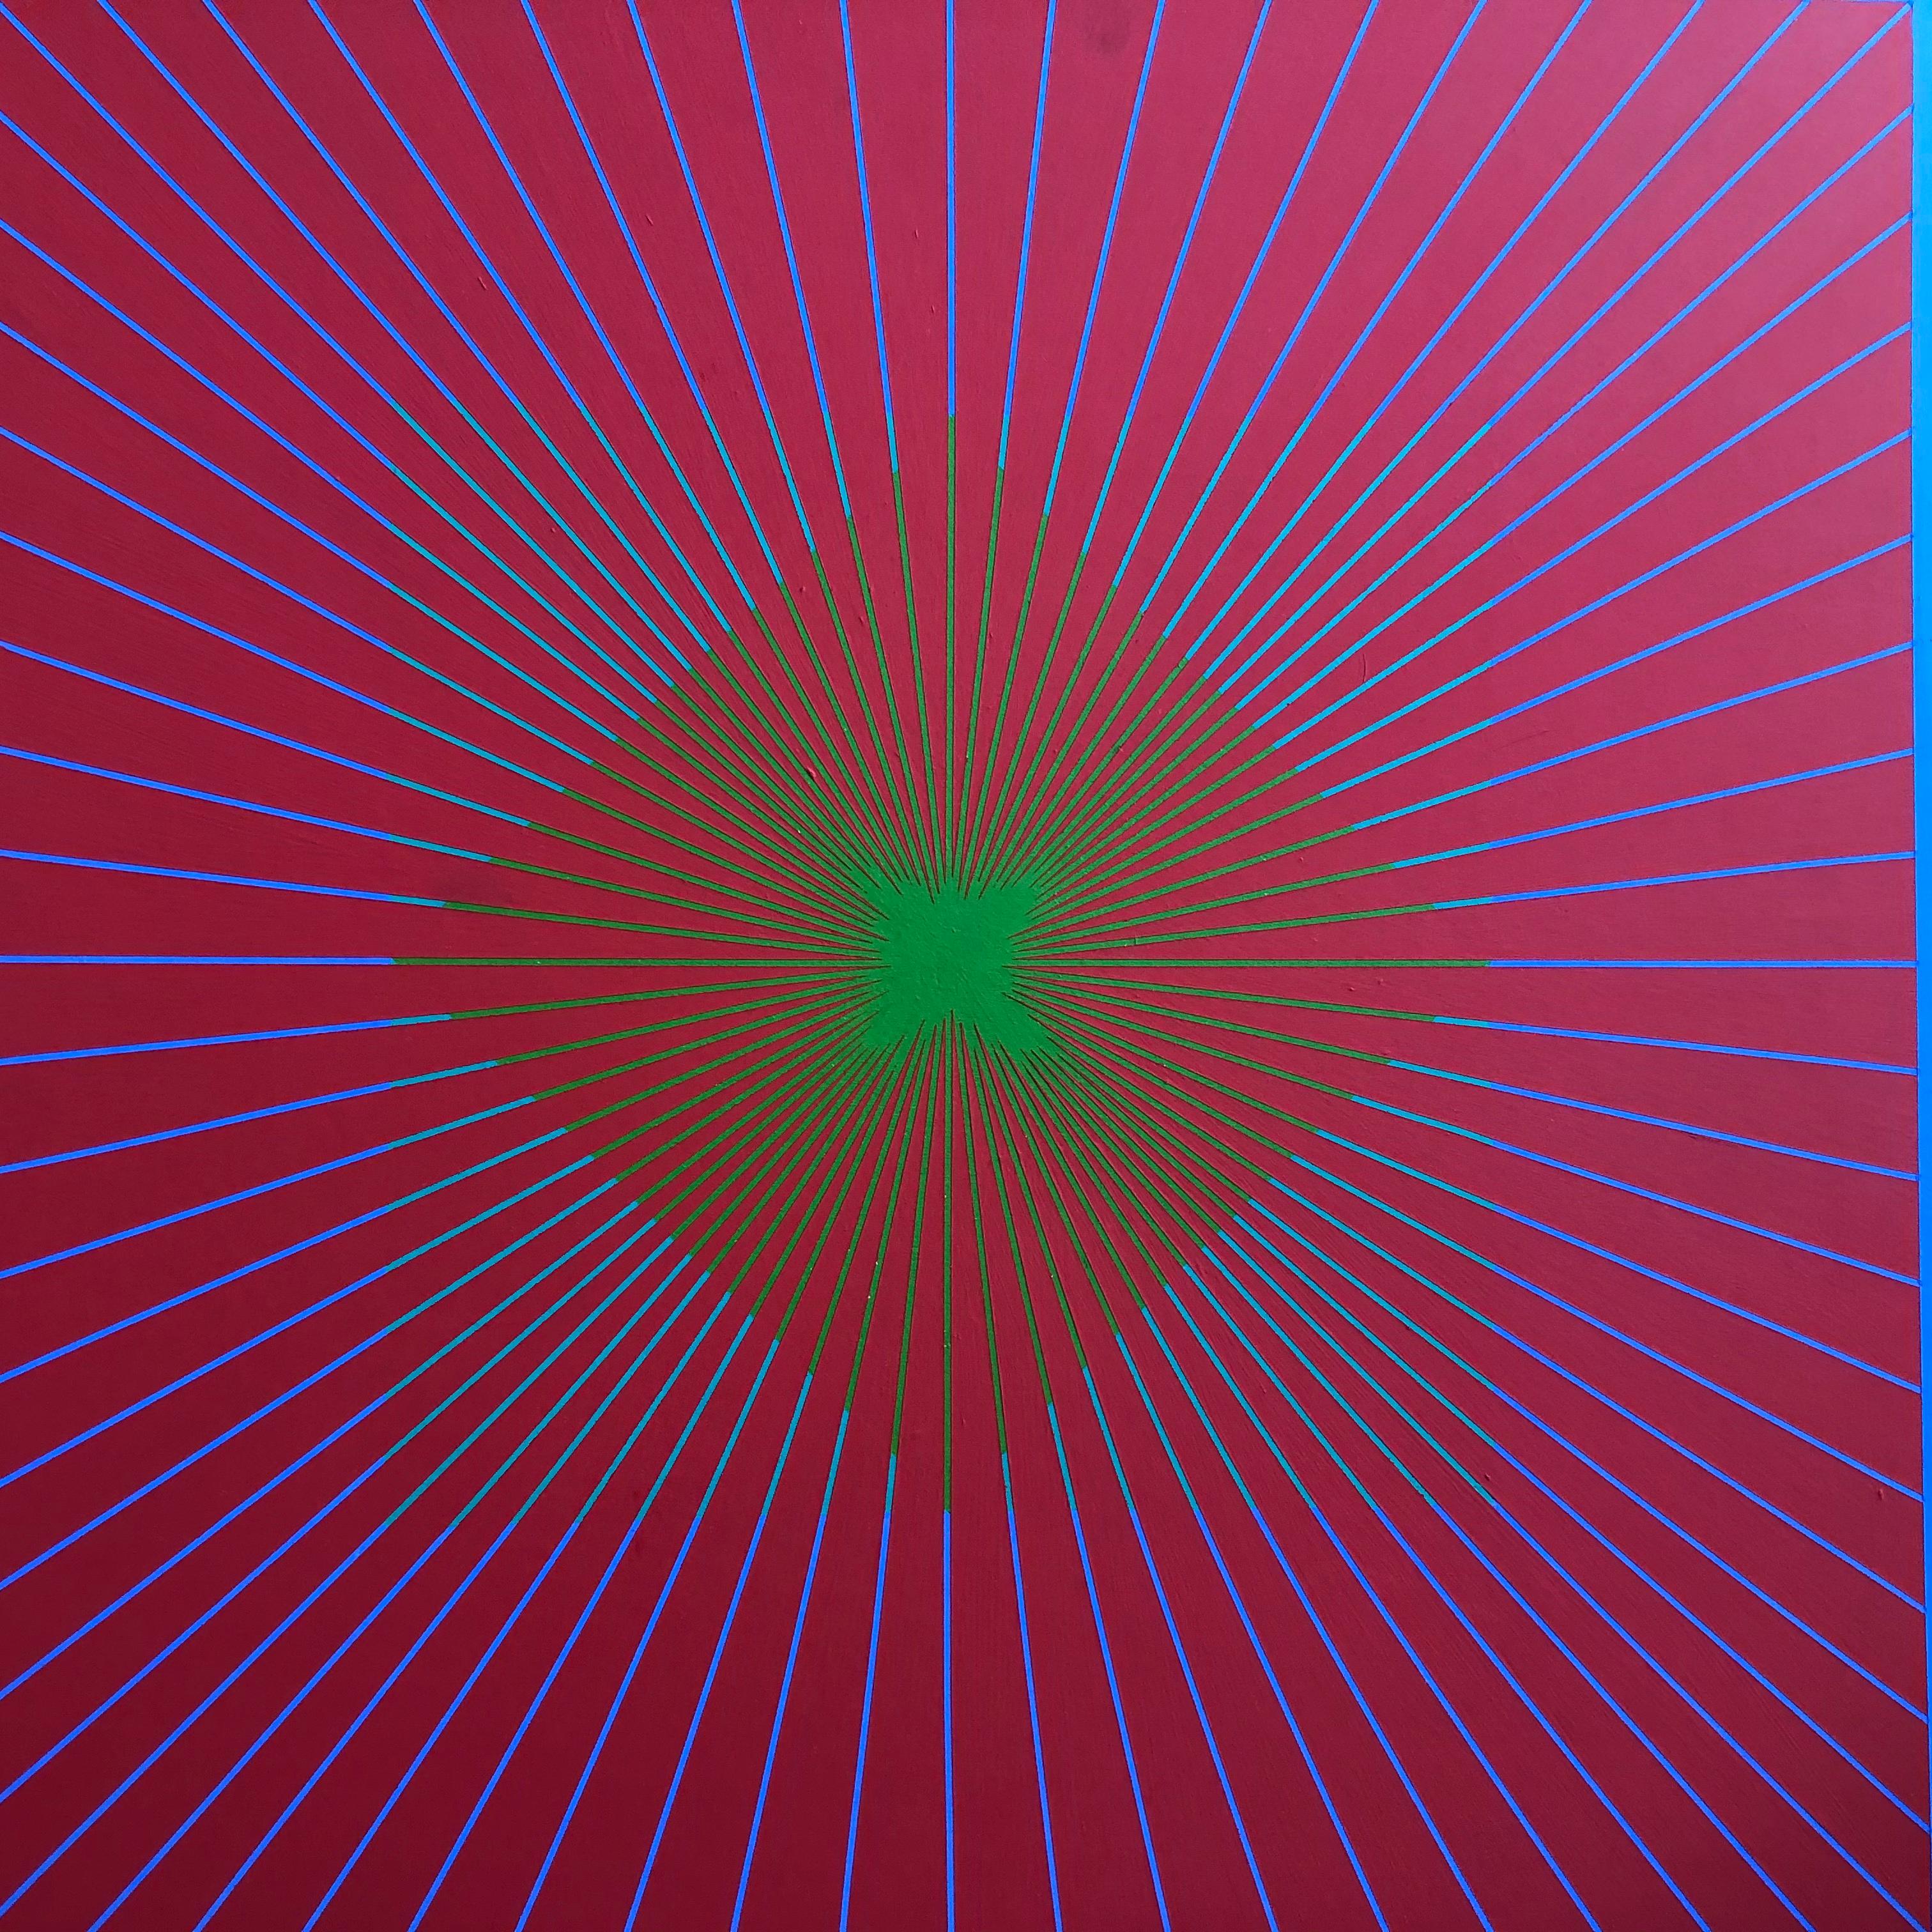 Richard Anuszkiewicz: 1930-2020. Very important and well listed American artist. He has auction results as high as $250,000. He was the leader of what would be called OP Art short for optical art. He was concerned with the optical changes when